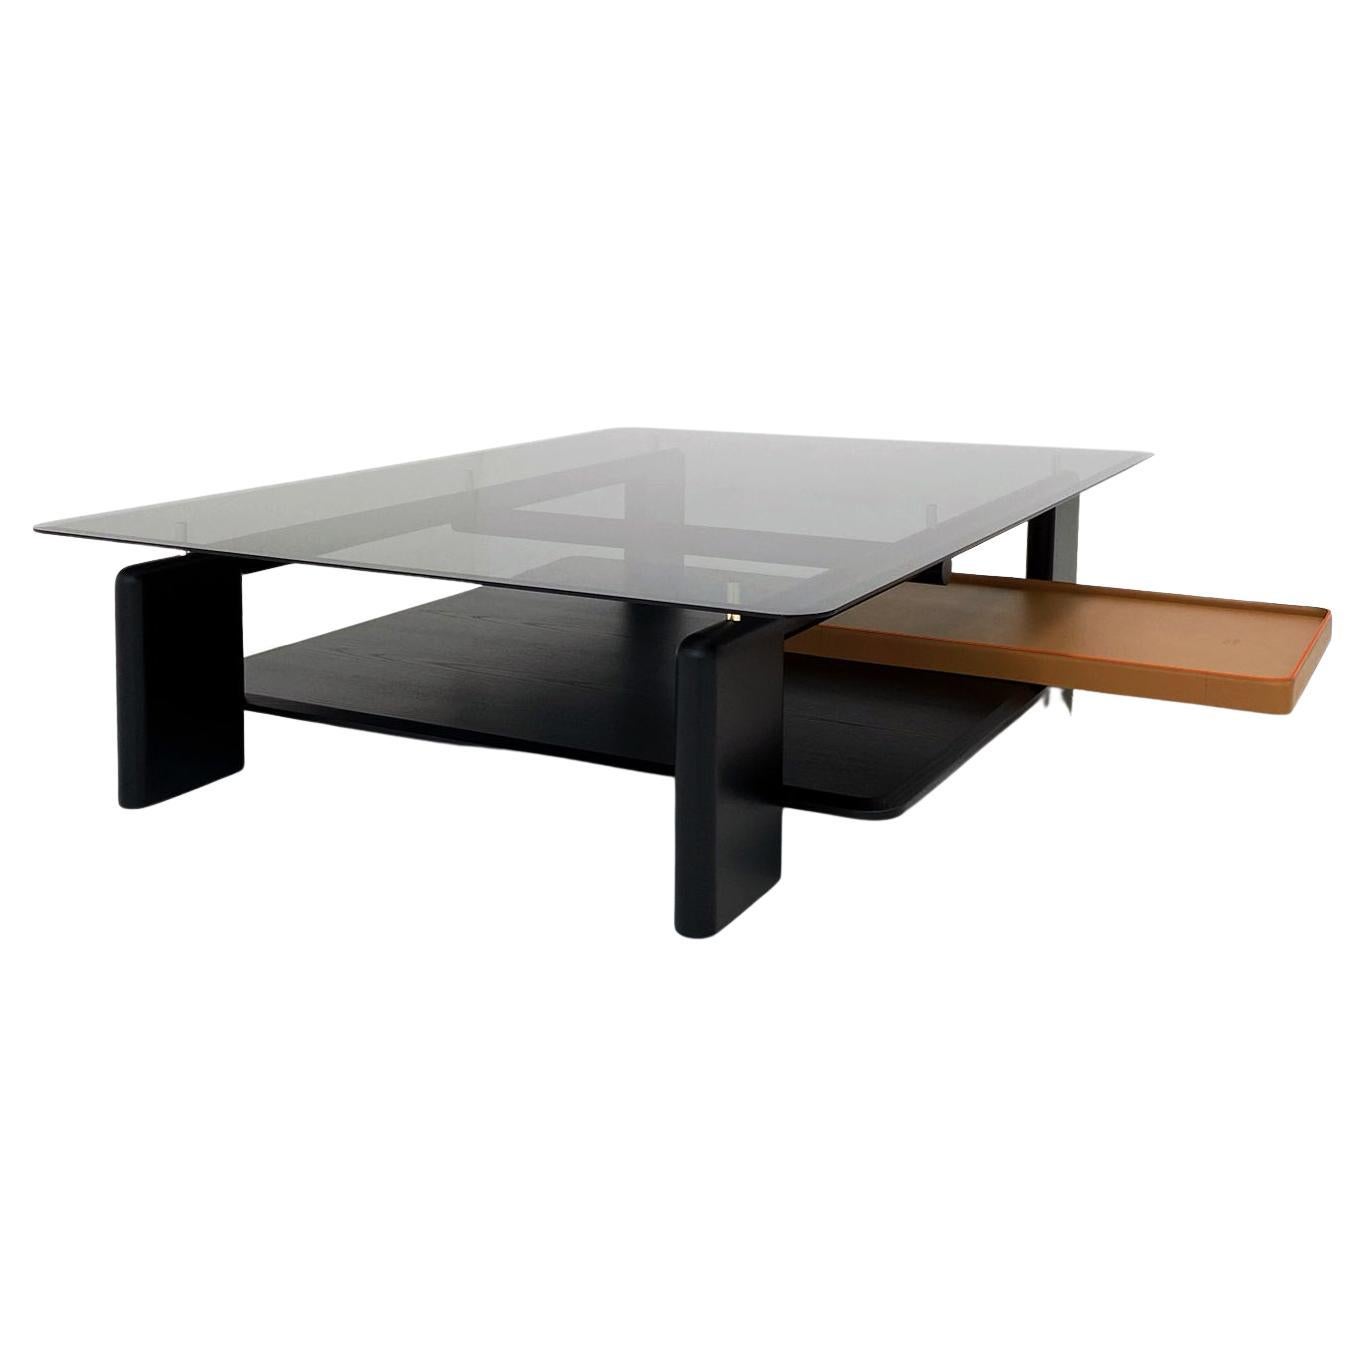 Toro, the luxurious Coffee Table with Leather Tray